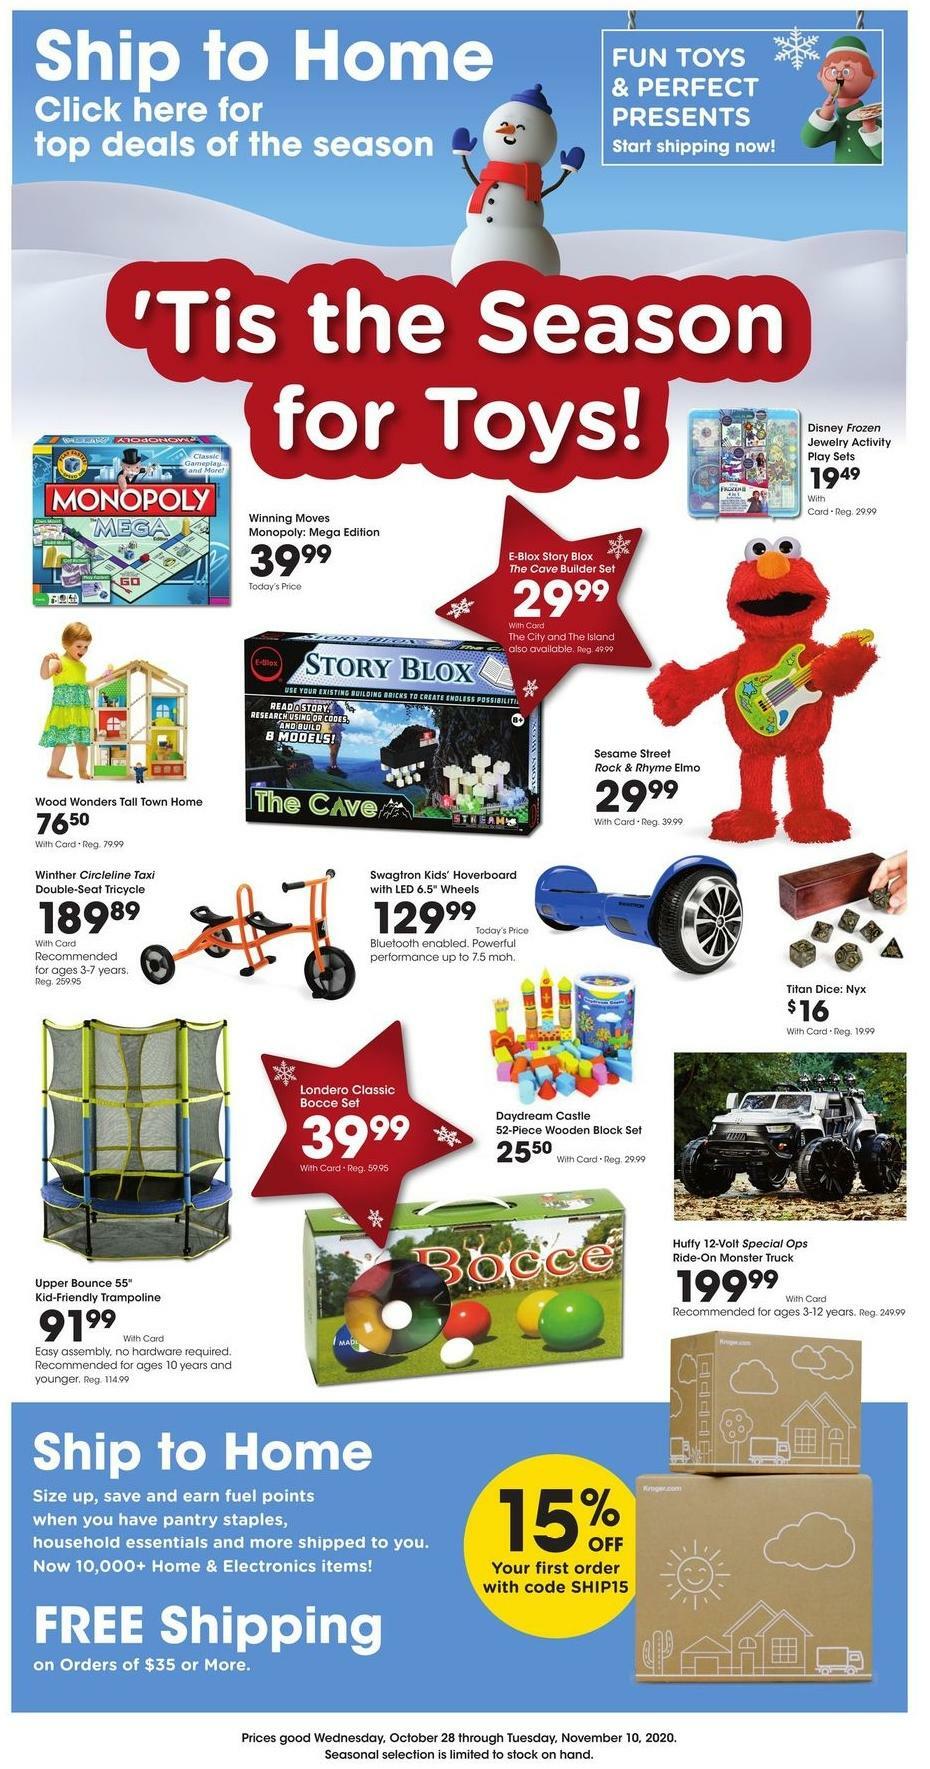 Fred Meyer Ship to Home Weekly Ad from October 28